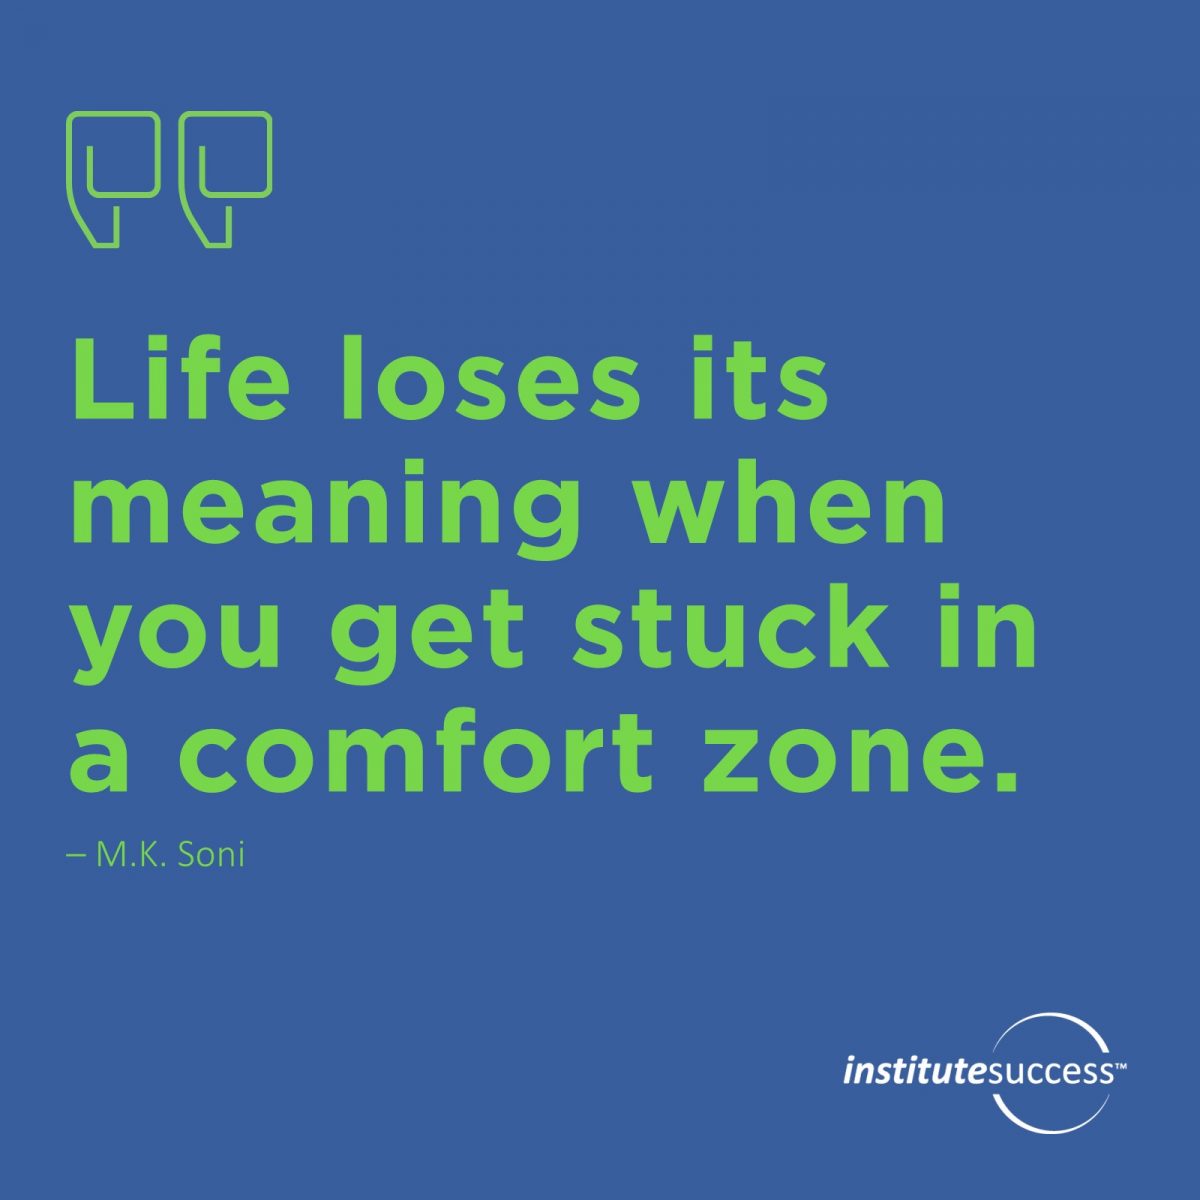 Life loses its meaning when you get stuck in a comfort zone. 	M.K. Soni